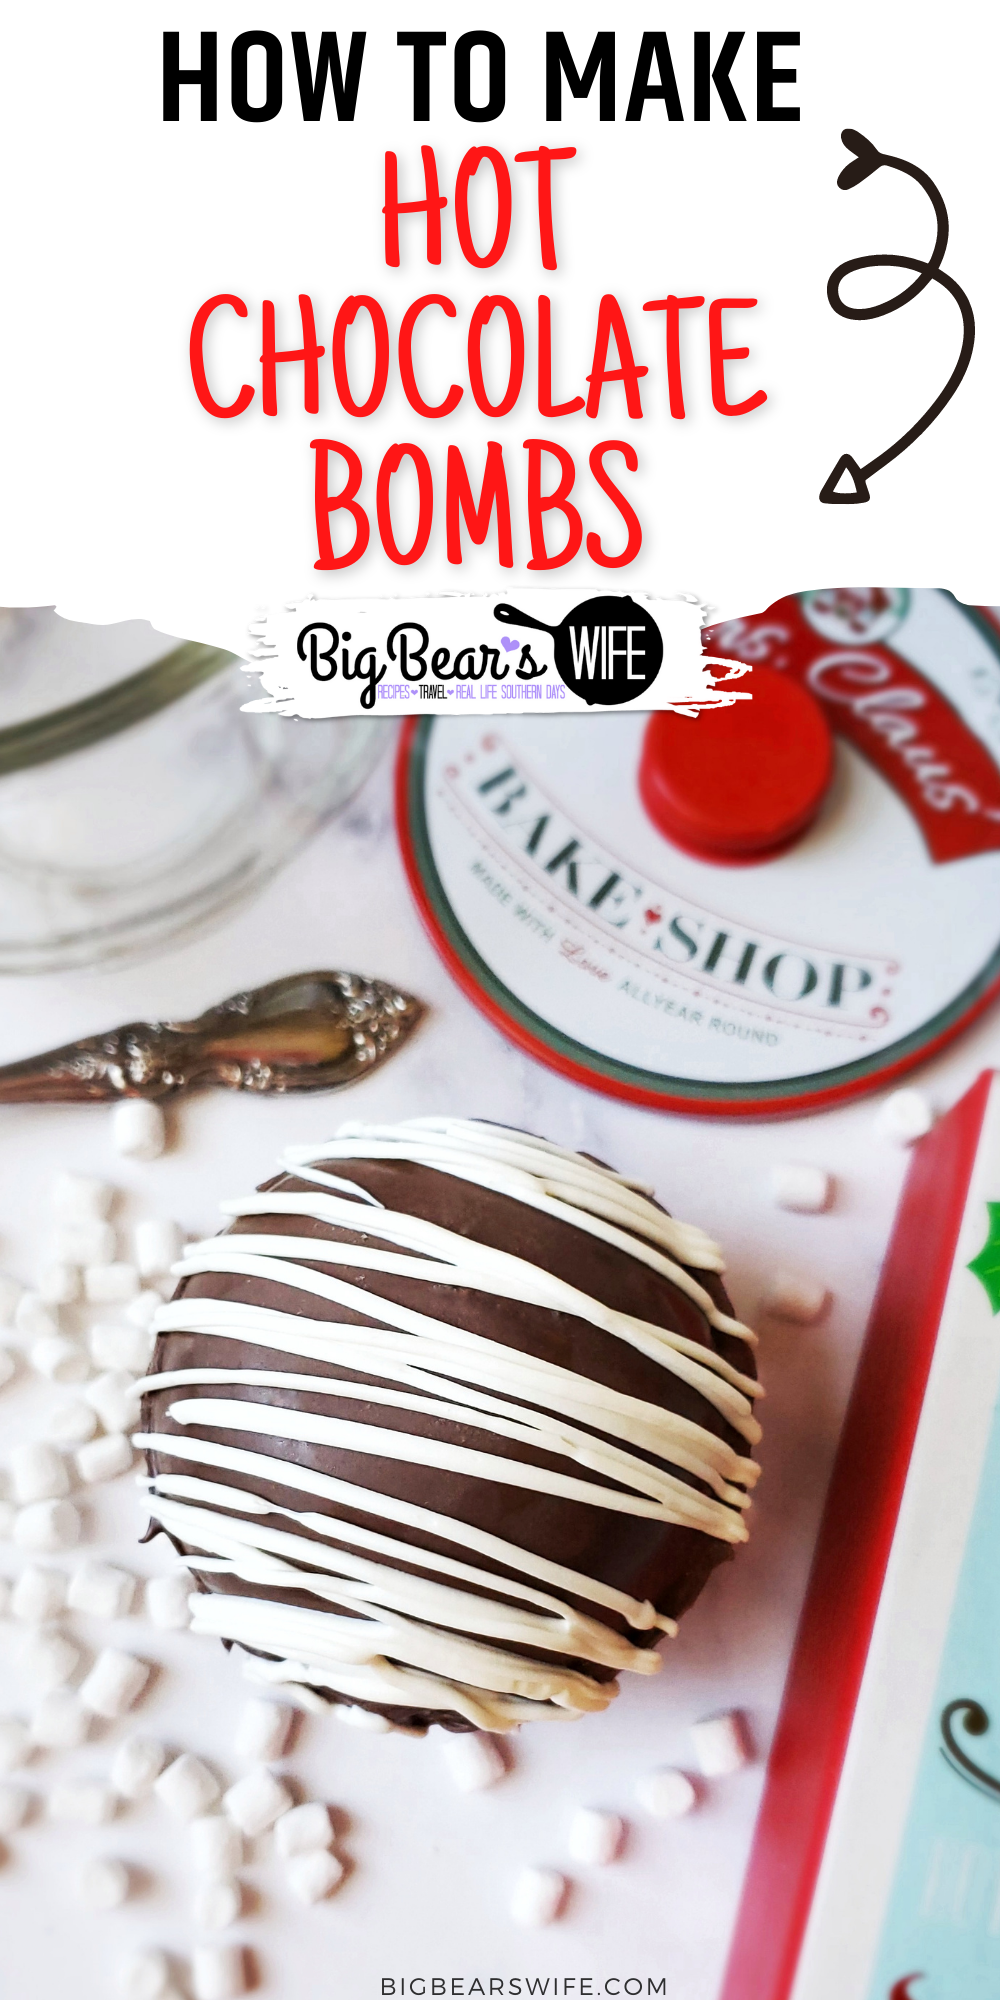 These Hot Chocolate Bombs are like bath bombs for milk! Just pour hot milk over these chocolate bombs that are are filled with hot chocolate mix and marshmallows for the best mug of hot chocolate ever!  via @bigbearswife